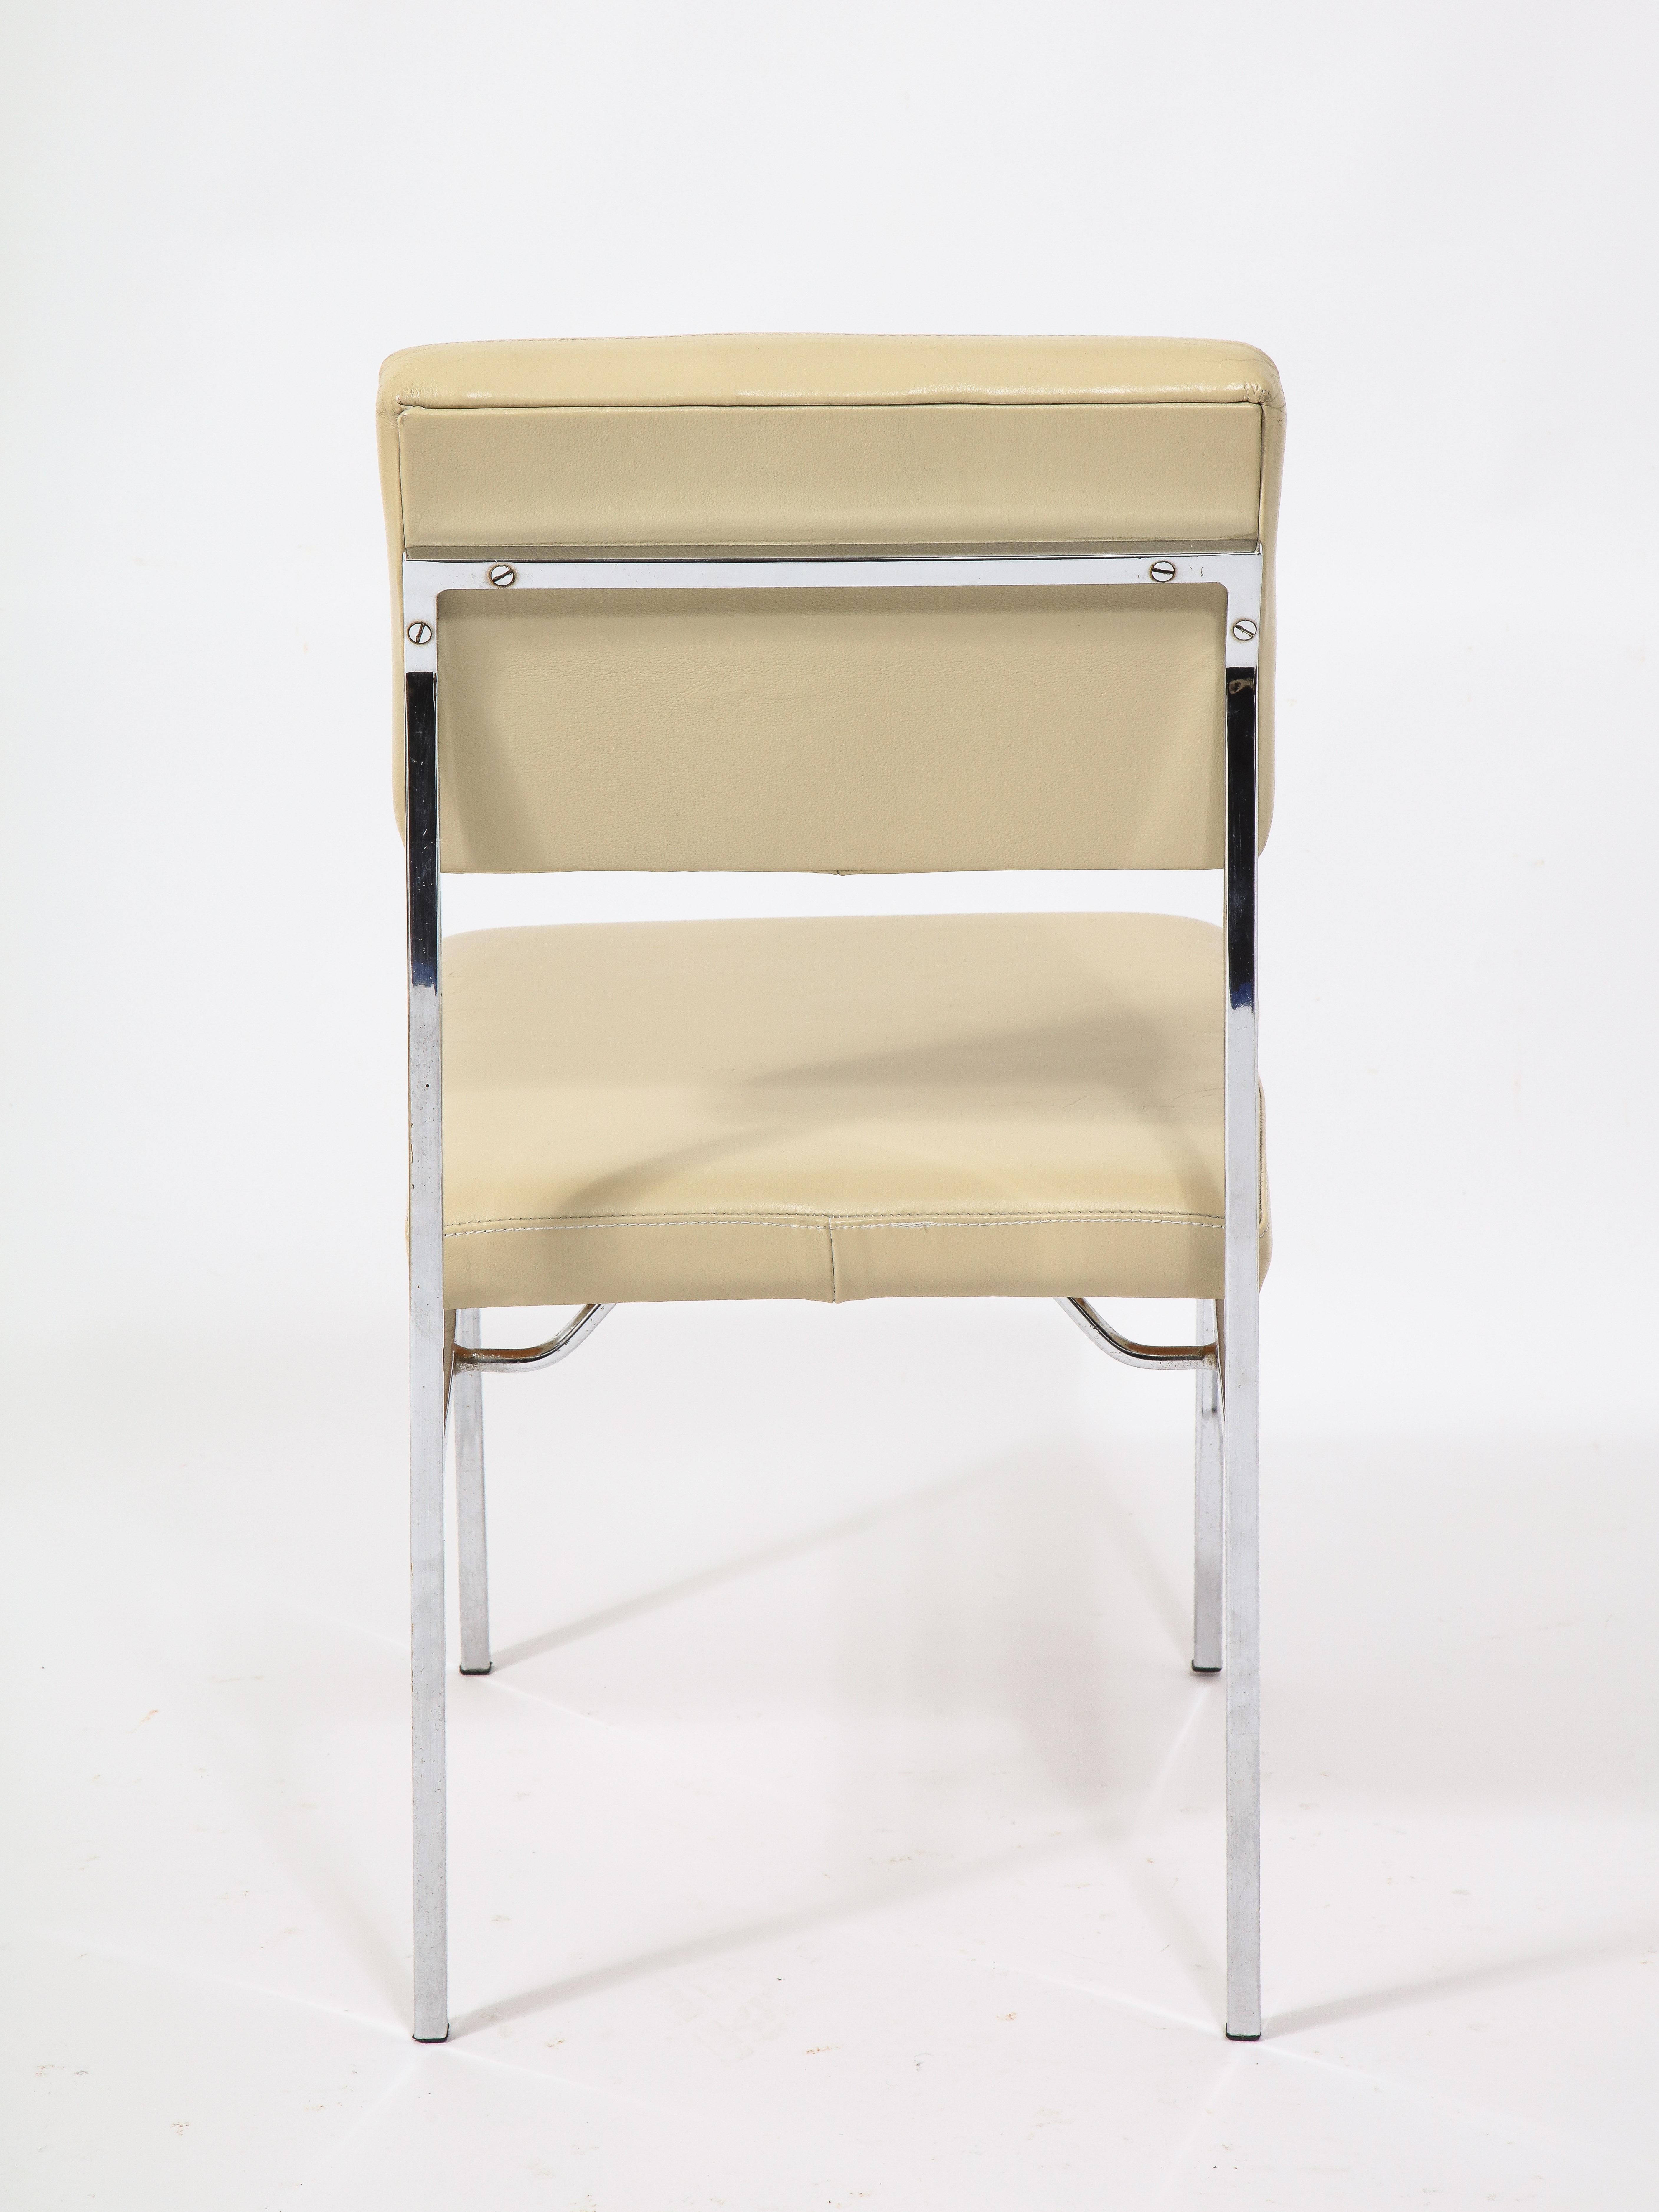 6 Chrome and Cream Leather P60 Chairs by Philippon & Lecoq, France, 1960's For Sale 6